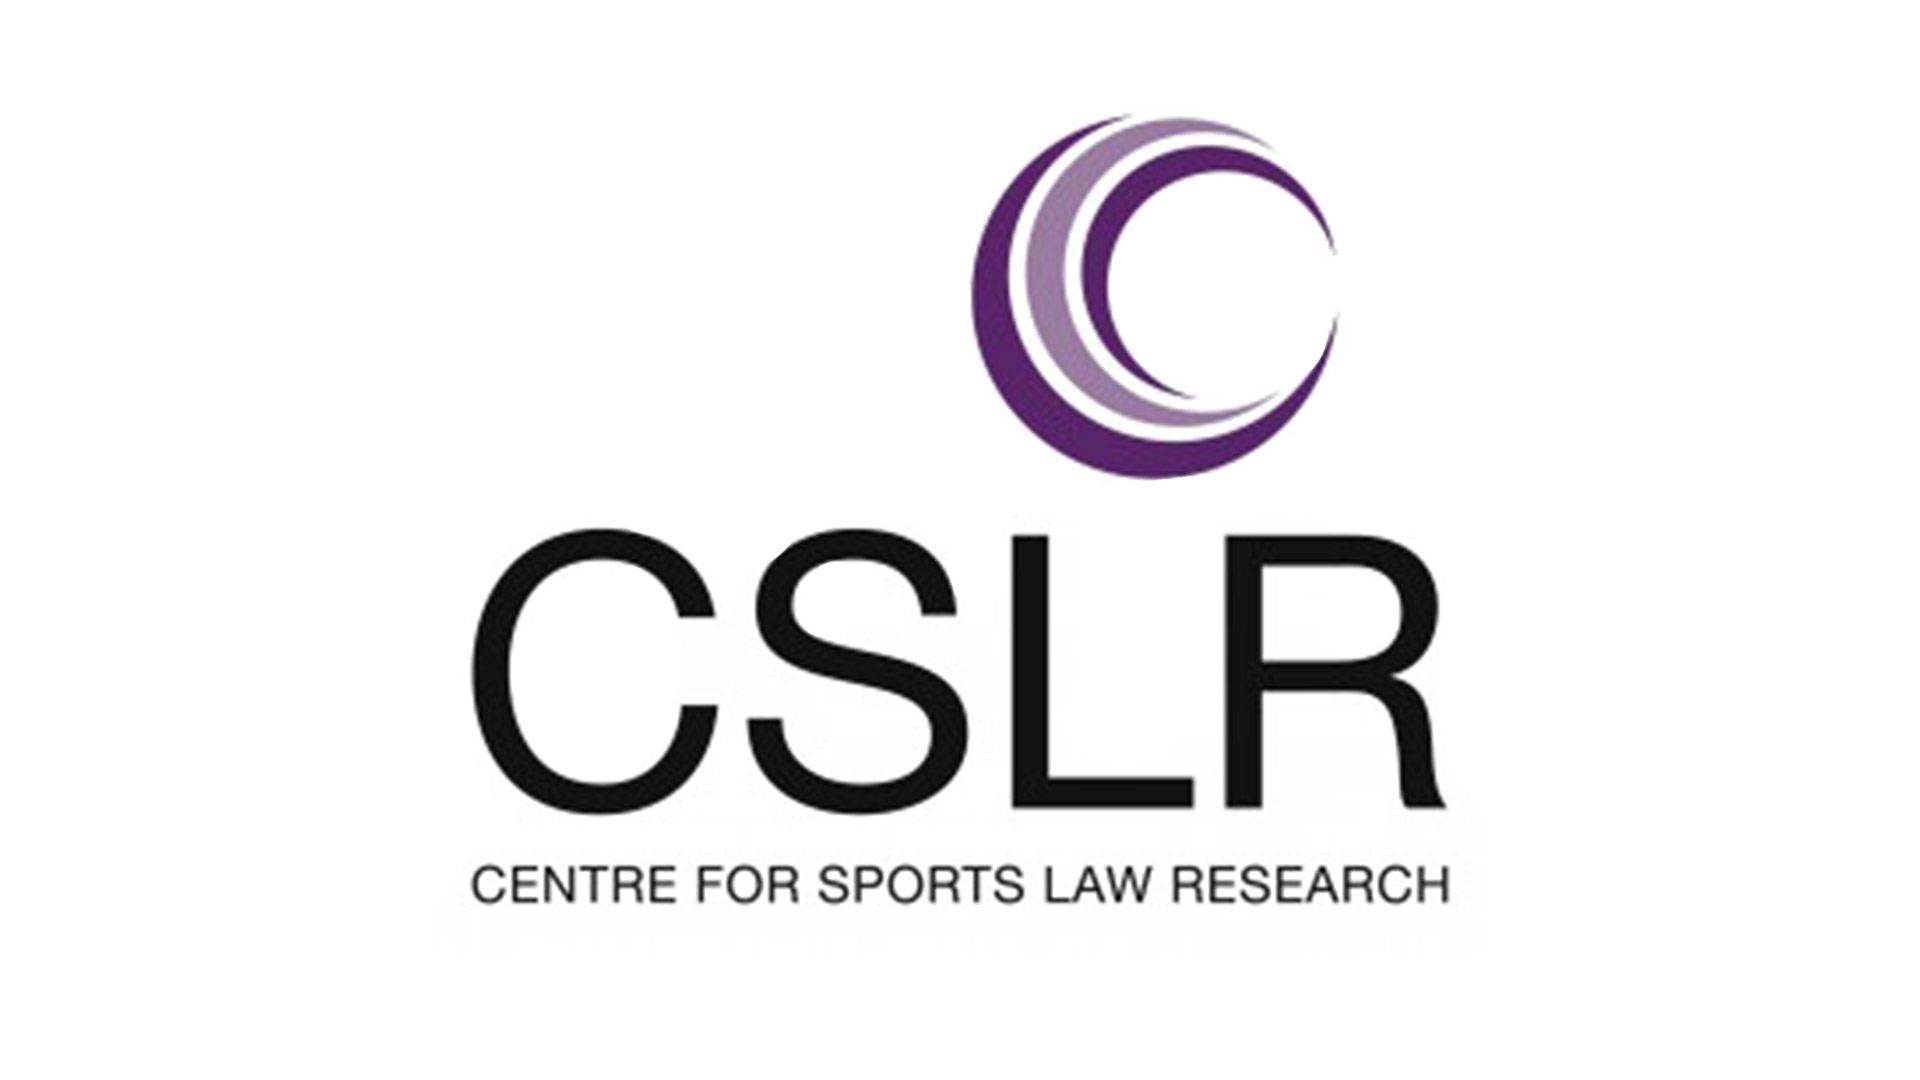 Centre for Sports Law Research logo